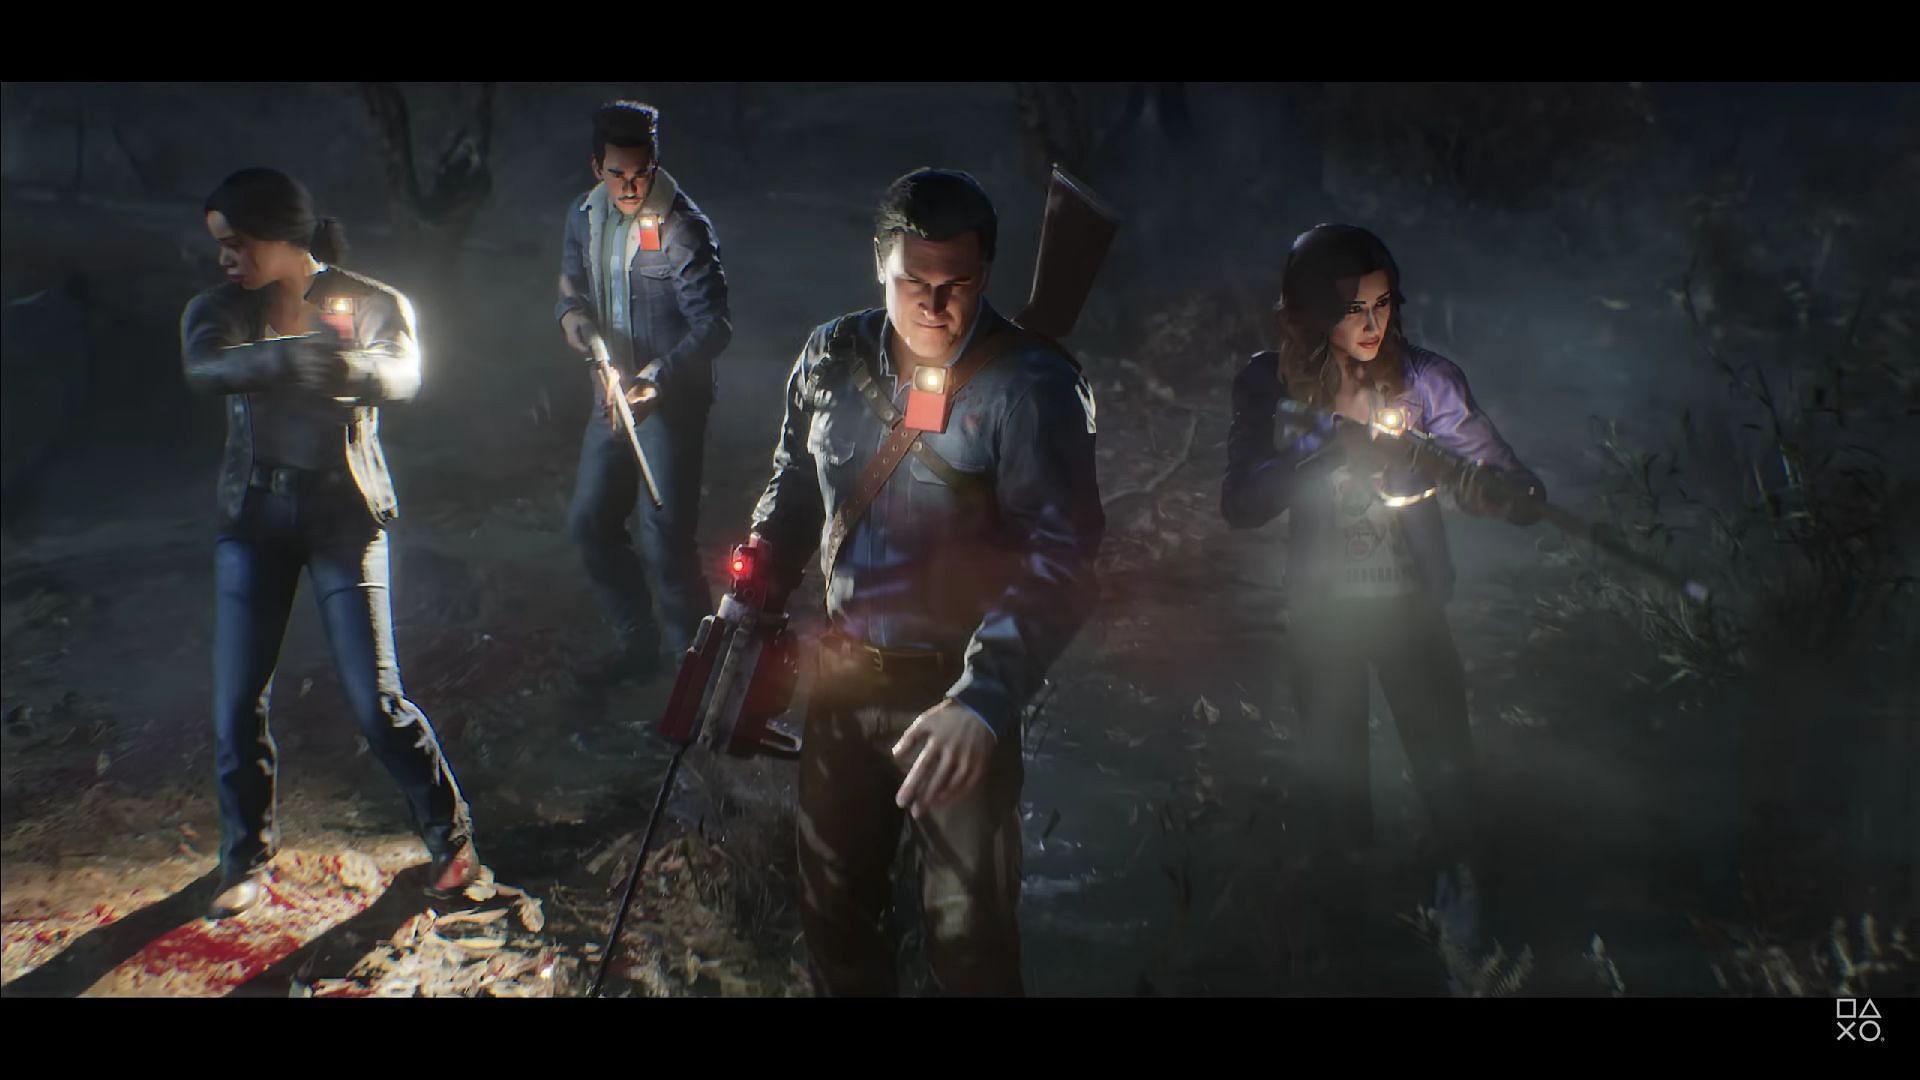 Players of Evil Dead: The Game can help their team succeed by playing as a Leader (Image via Saber Interactive)